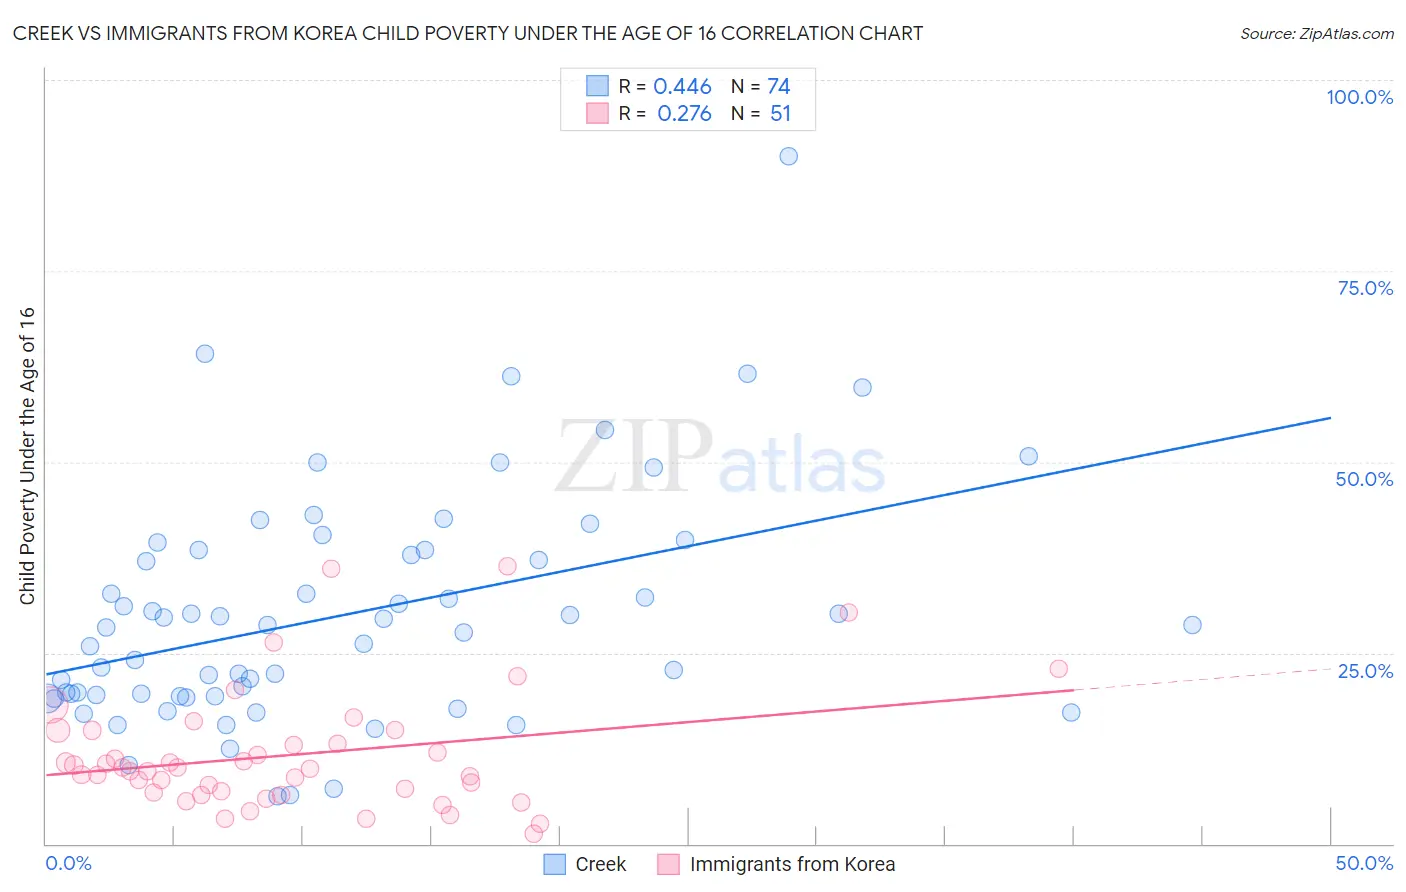 Creek vs Immigrants from Korea Child Poverty Under the Age of 16